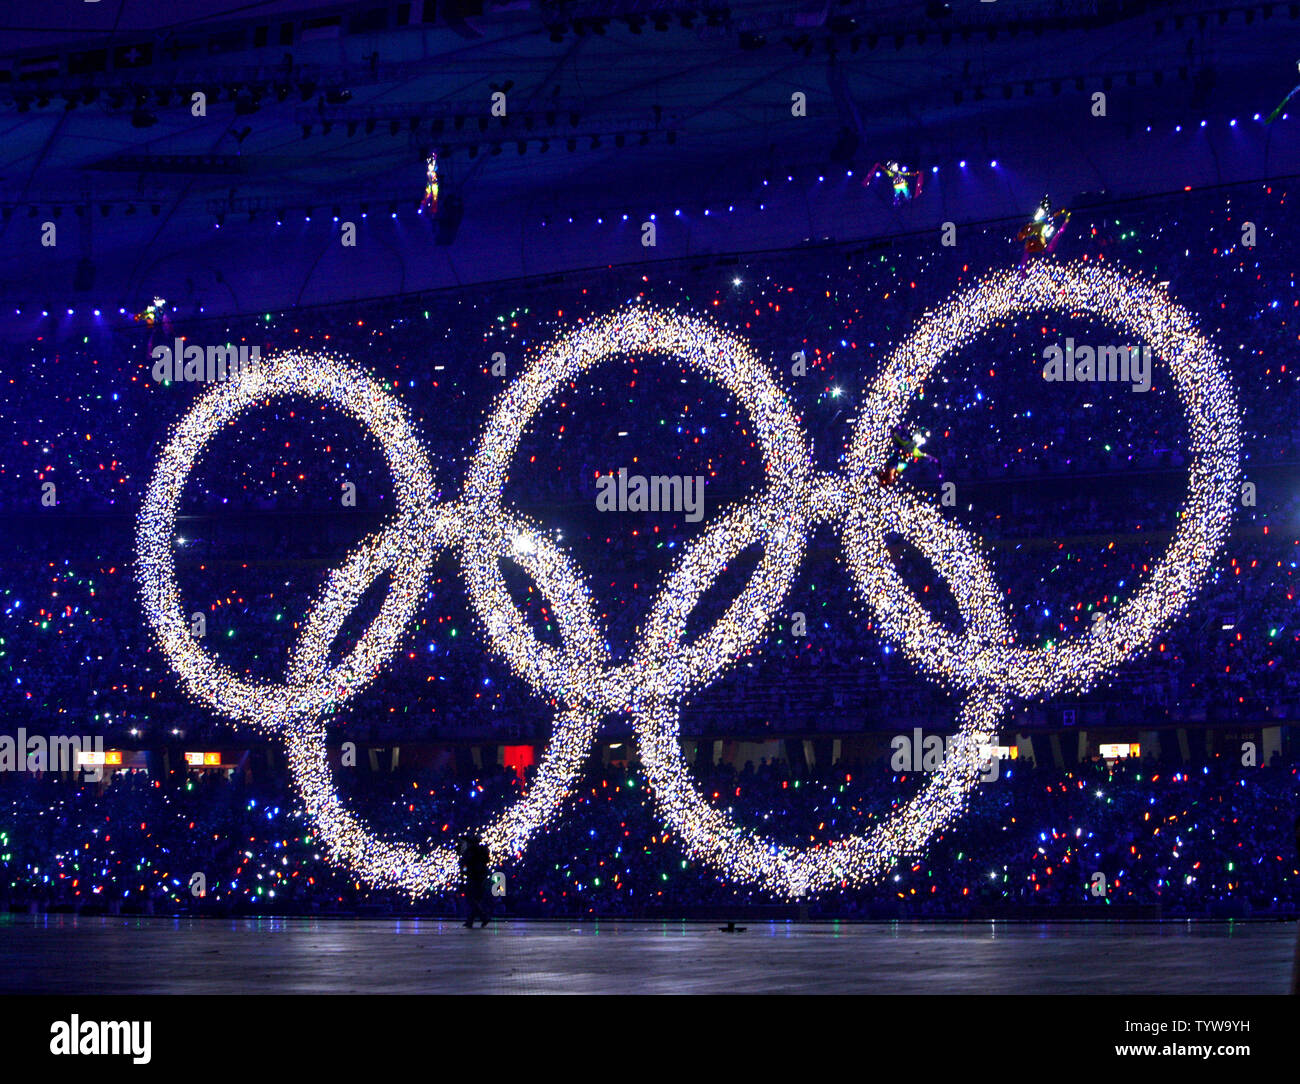 Olympic Rings (Opening Ceremony) | London Olympics, 27 July … | Flickr